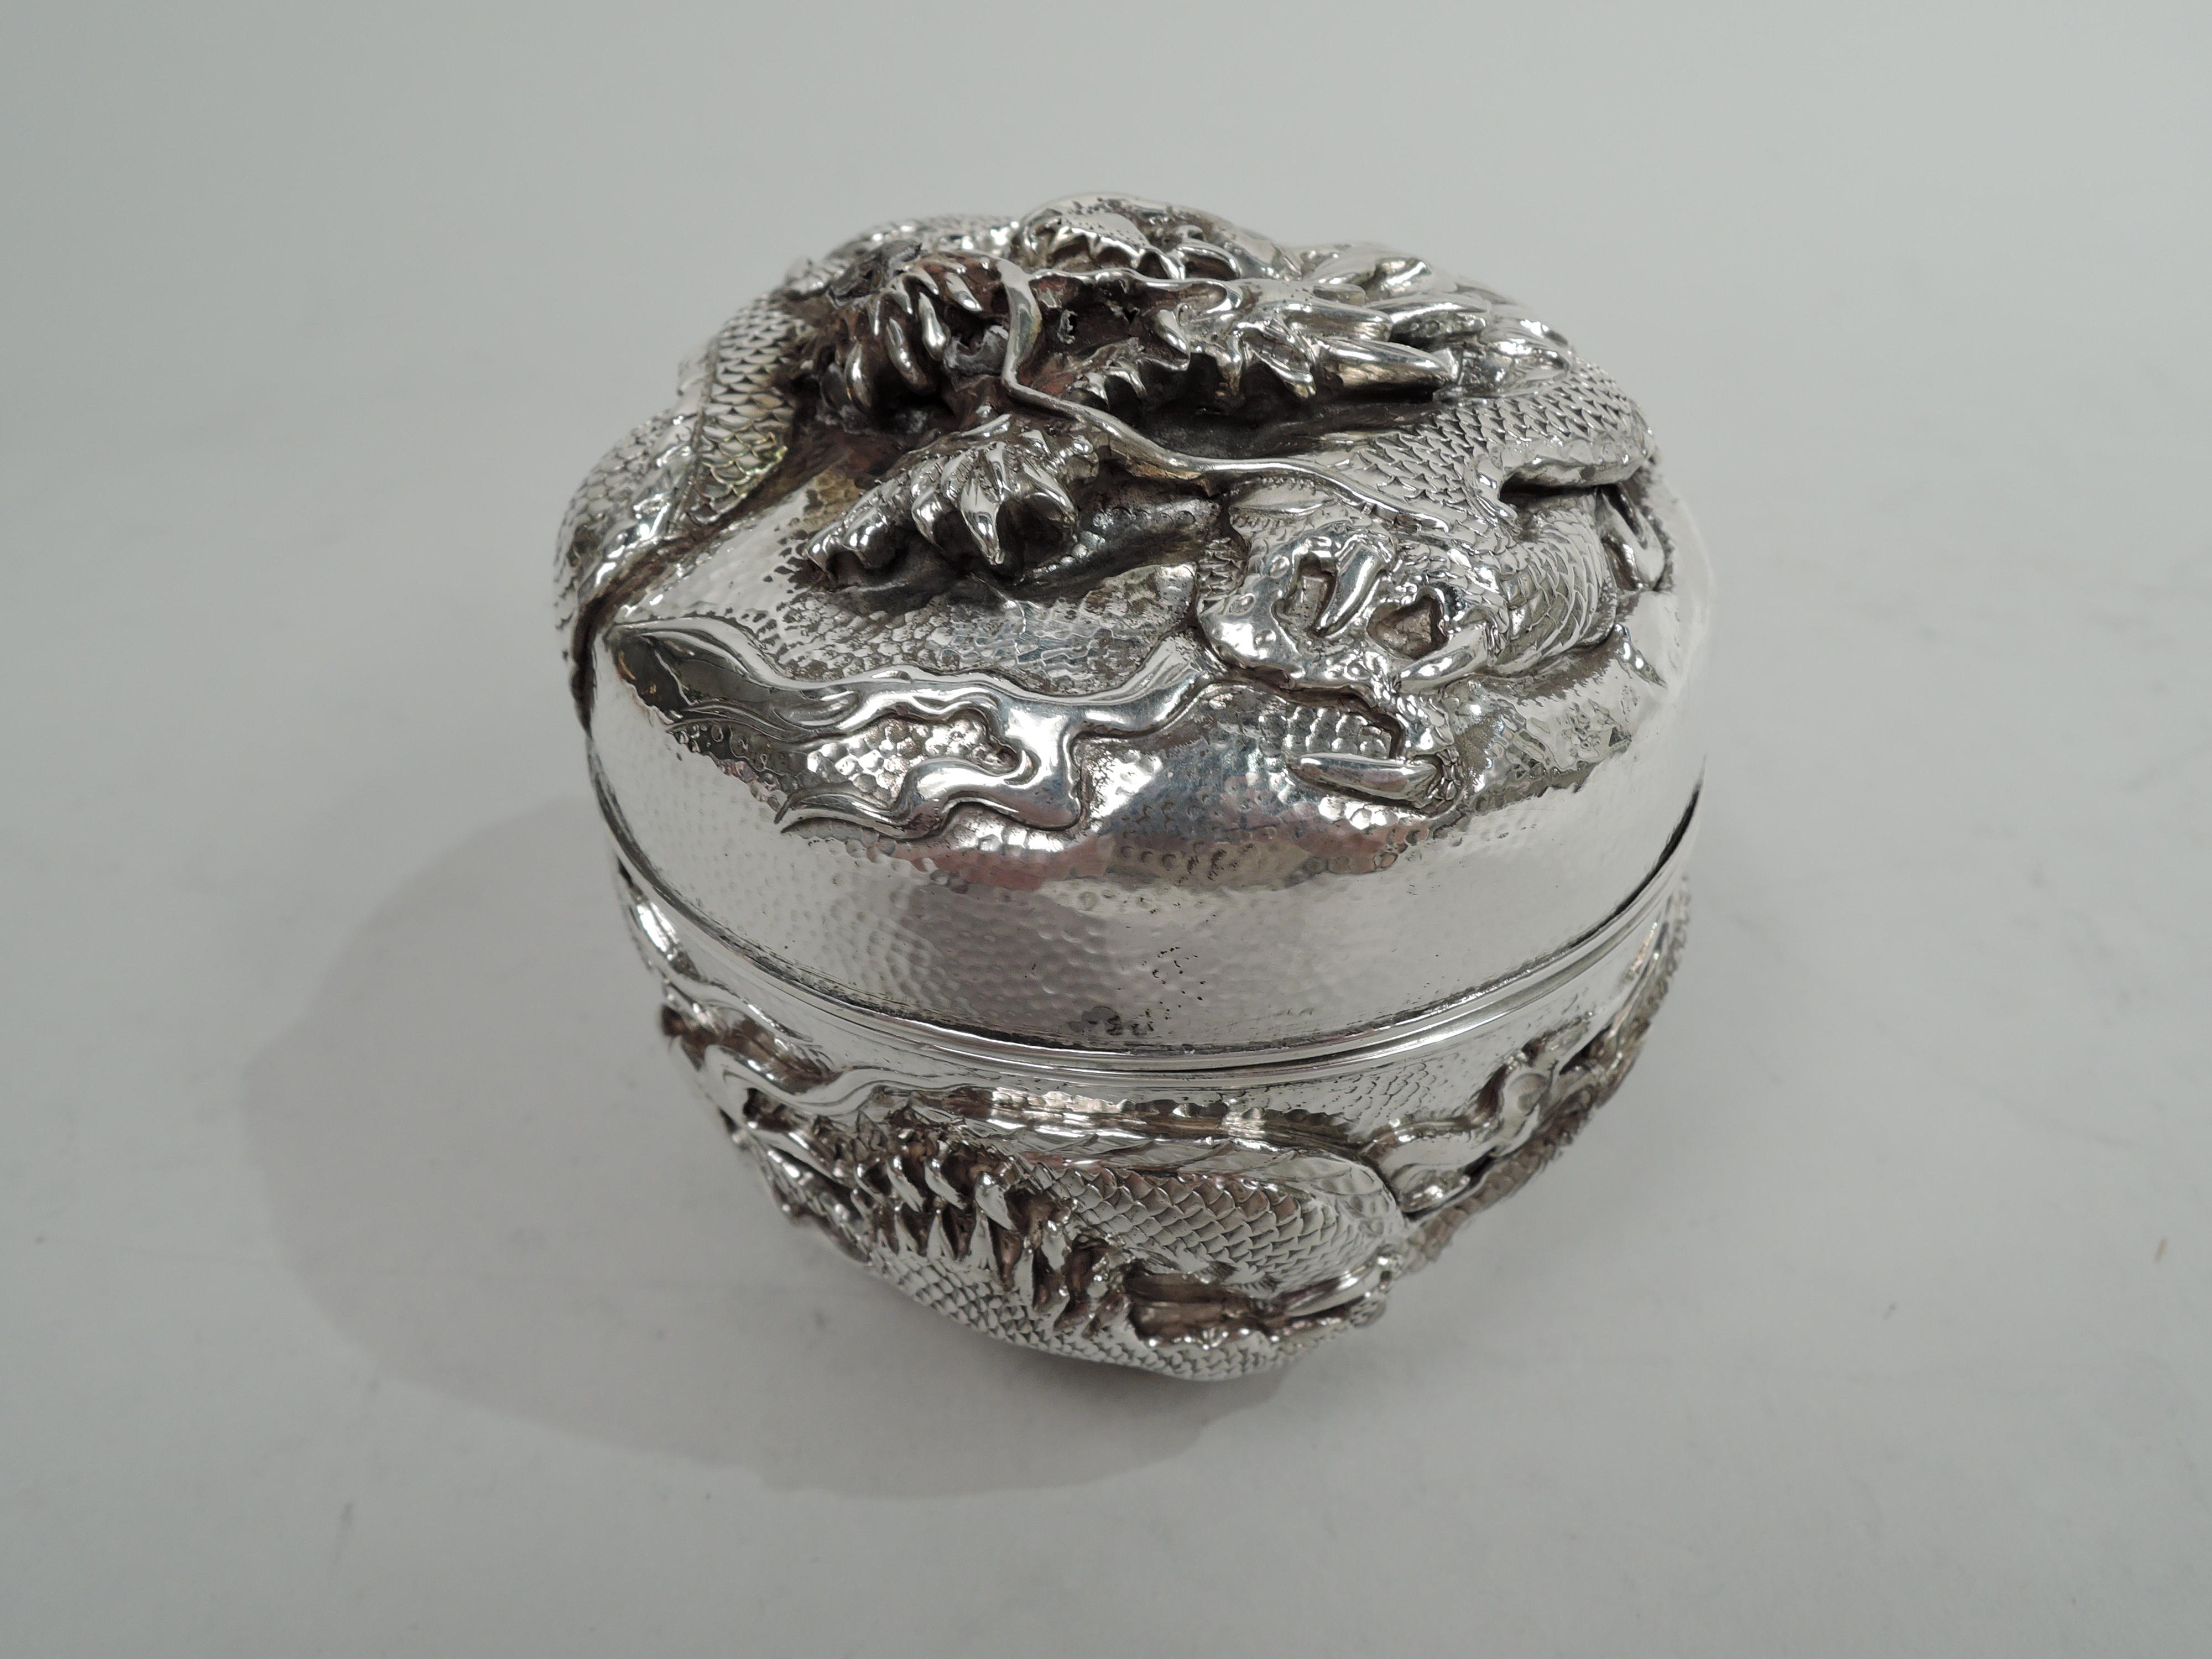 Japanese Meiji silver box, circa 1890. Round; gently curved sides applied with wraparound dragon—a scaly, spikey beast that chases its tail. A second coiled on cover top. Spot-hammered ground. Double walled. Japanese marks and stamp for Kuhn &